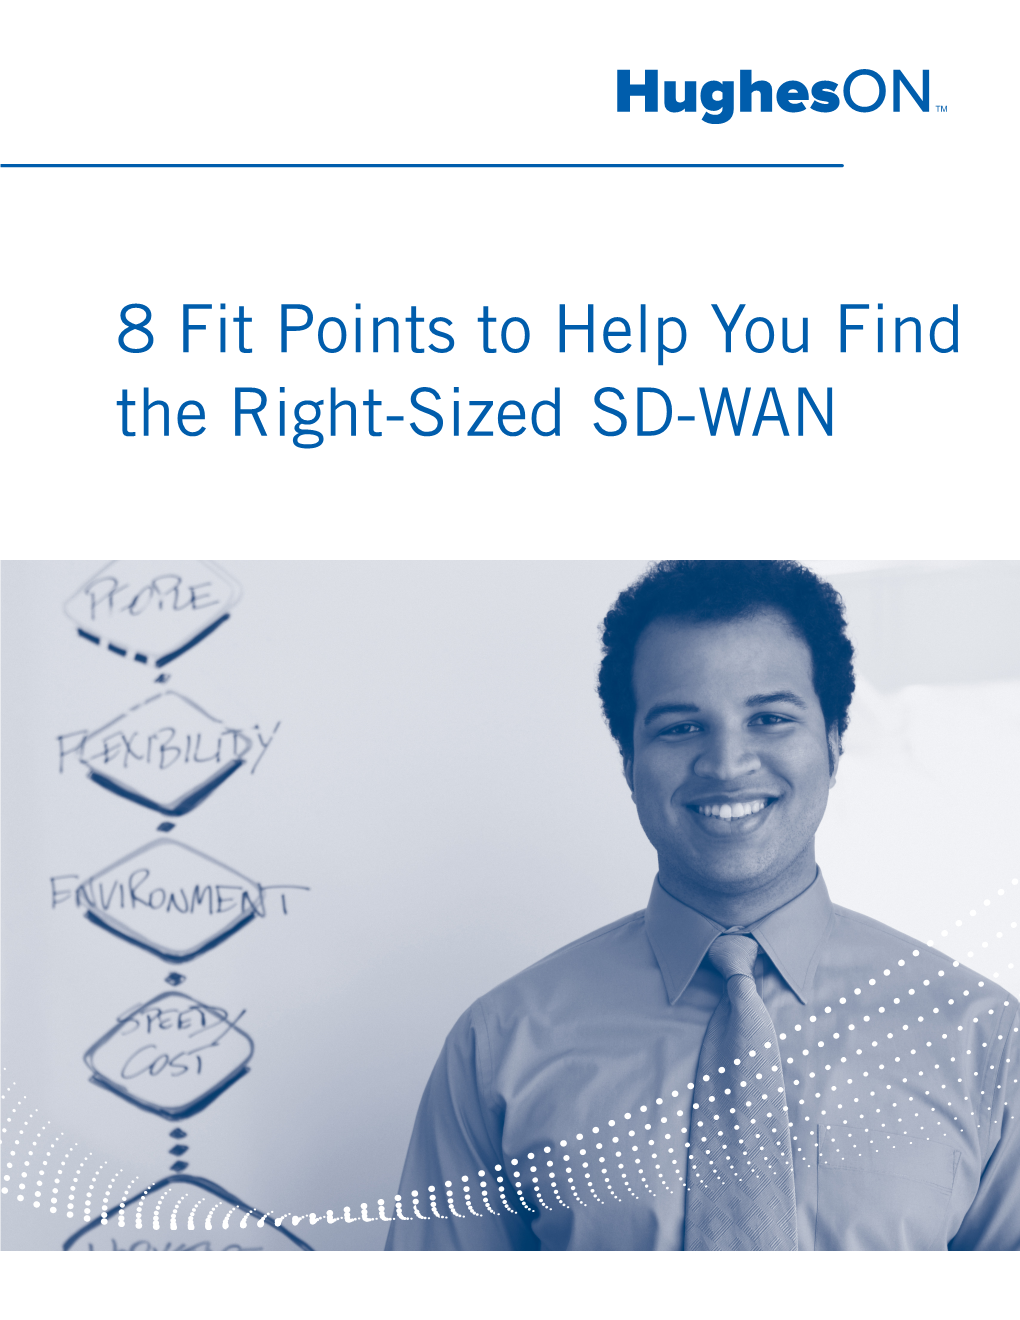 8 Fit Points to Help You Find the Right-Sized SD-WAN INTRODUCTION